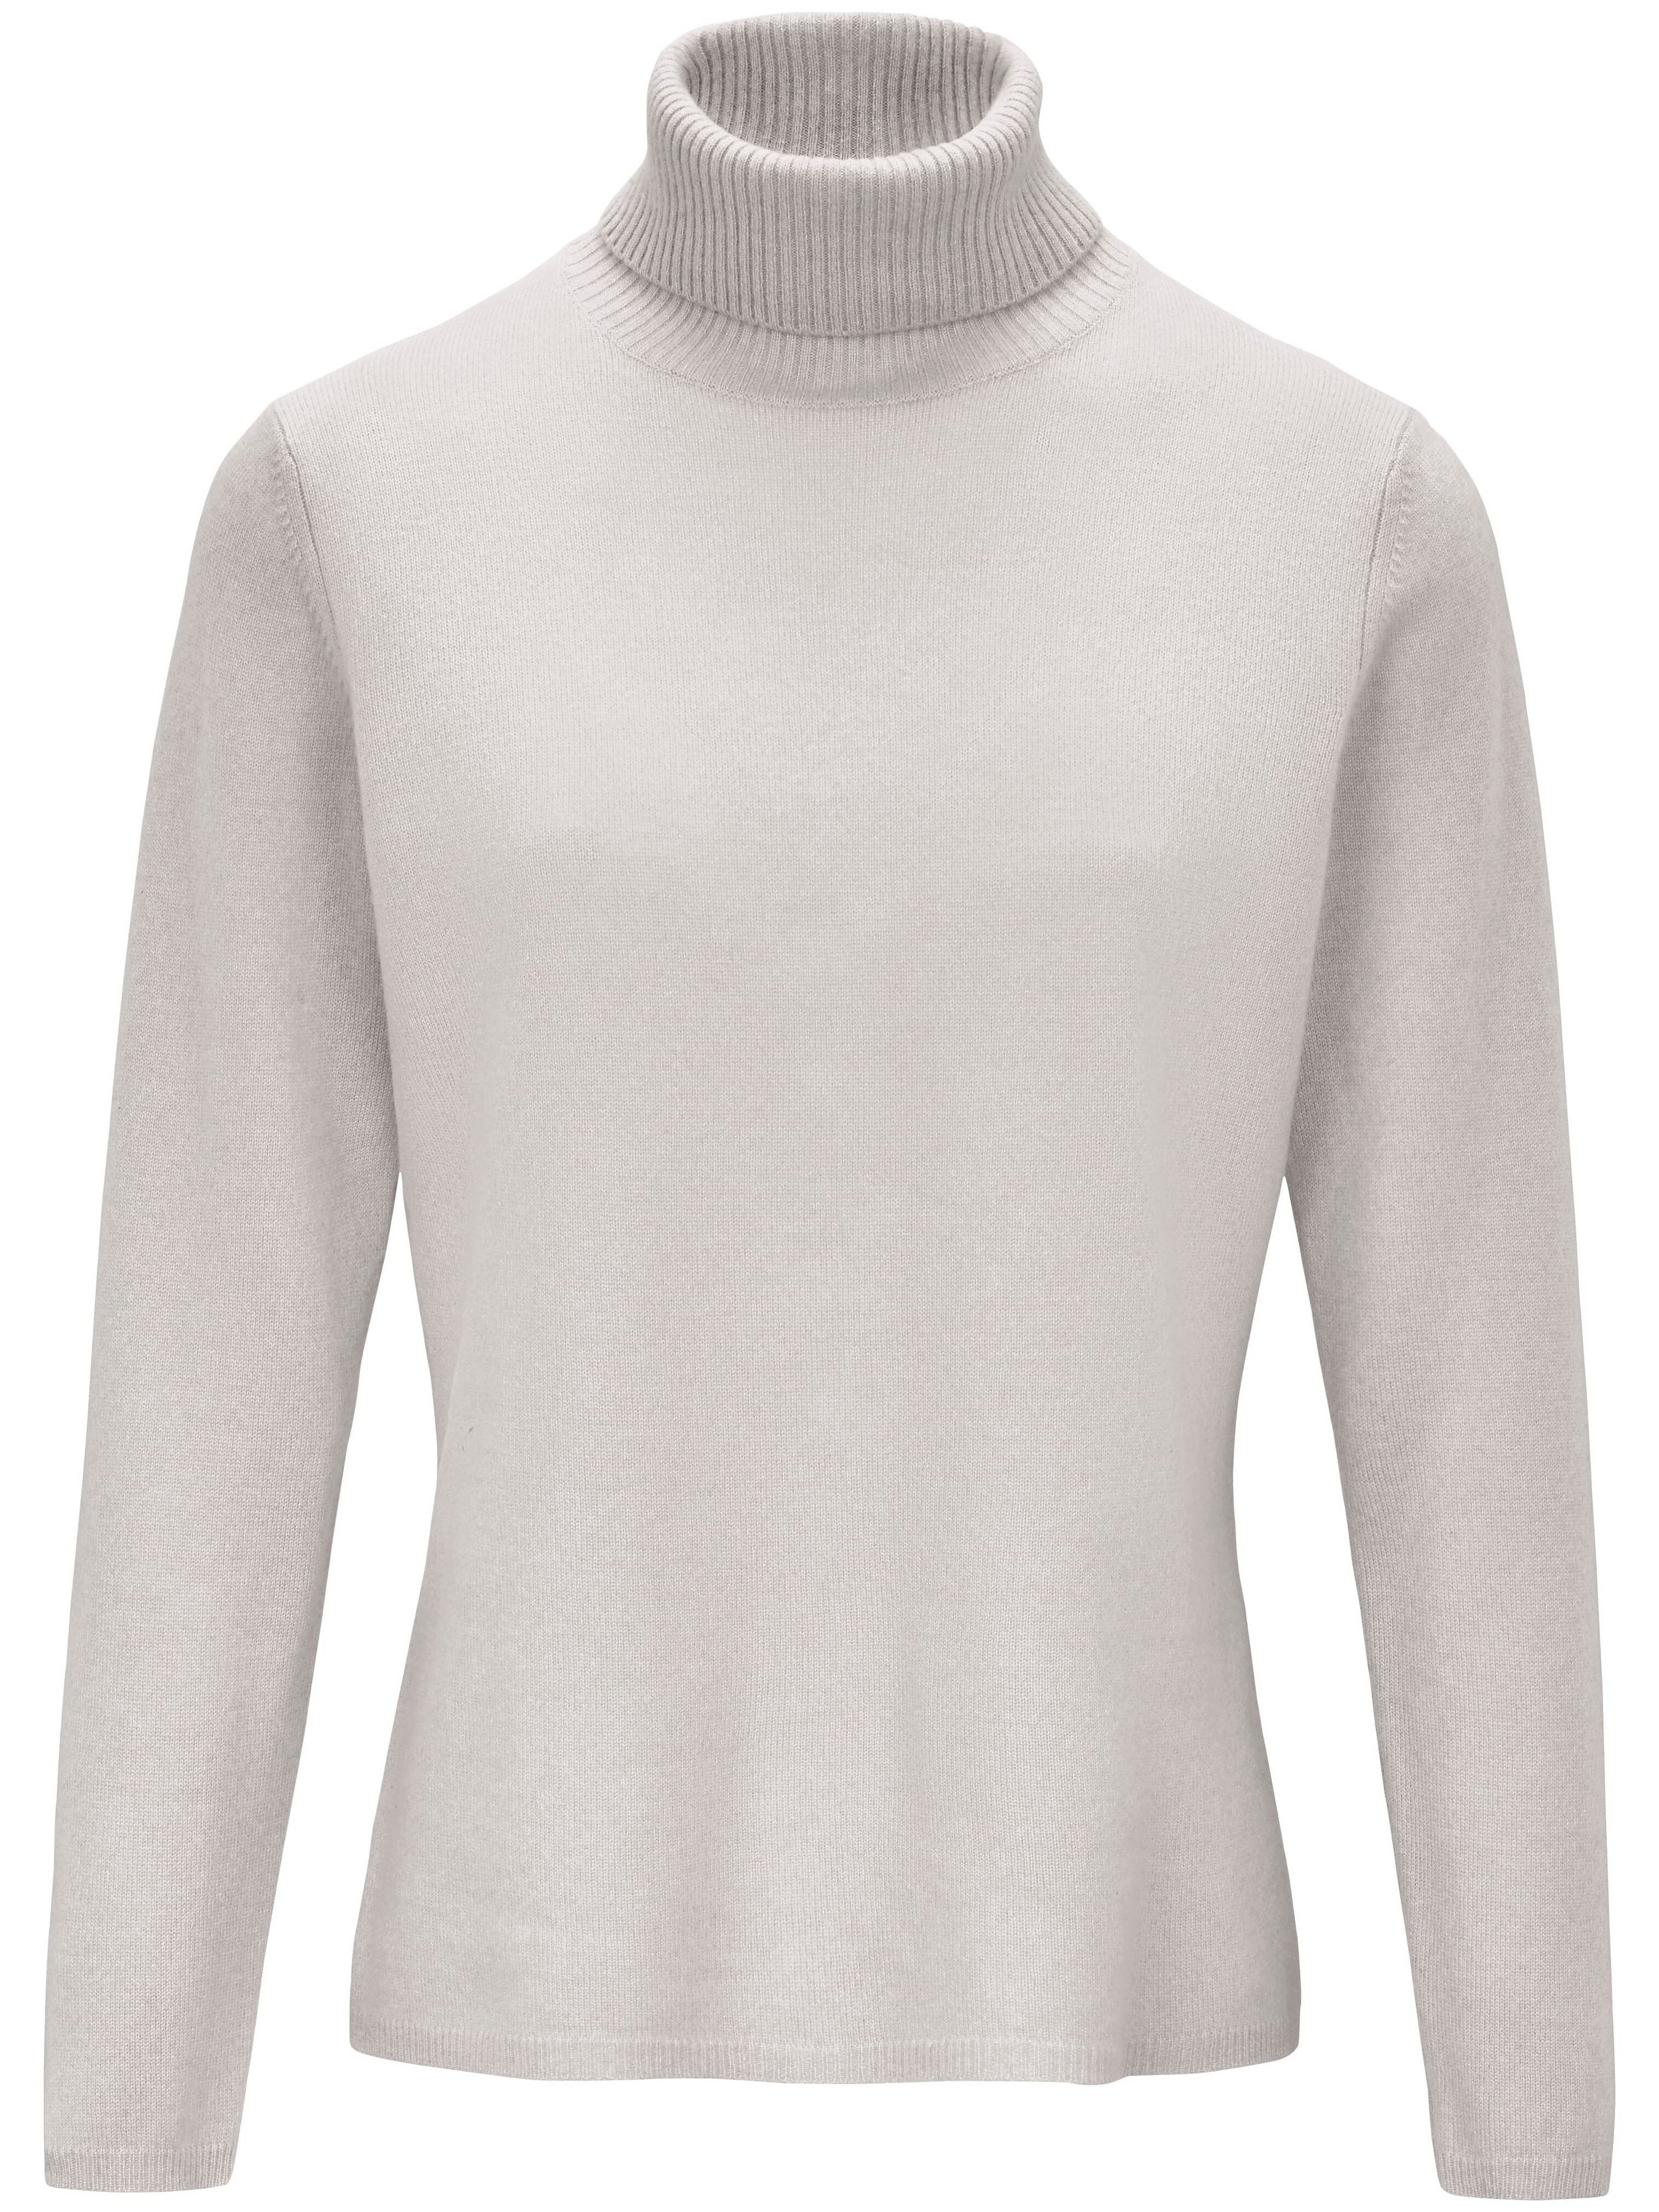 Le pull col roulé  include beige taille 40